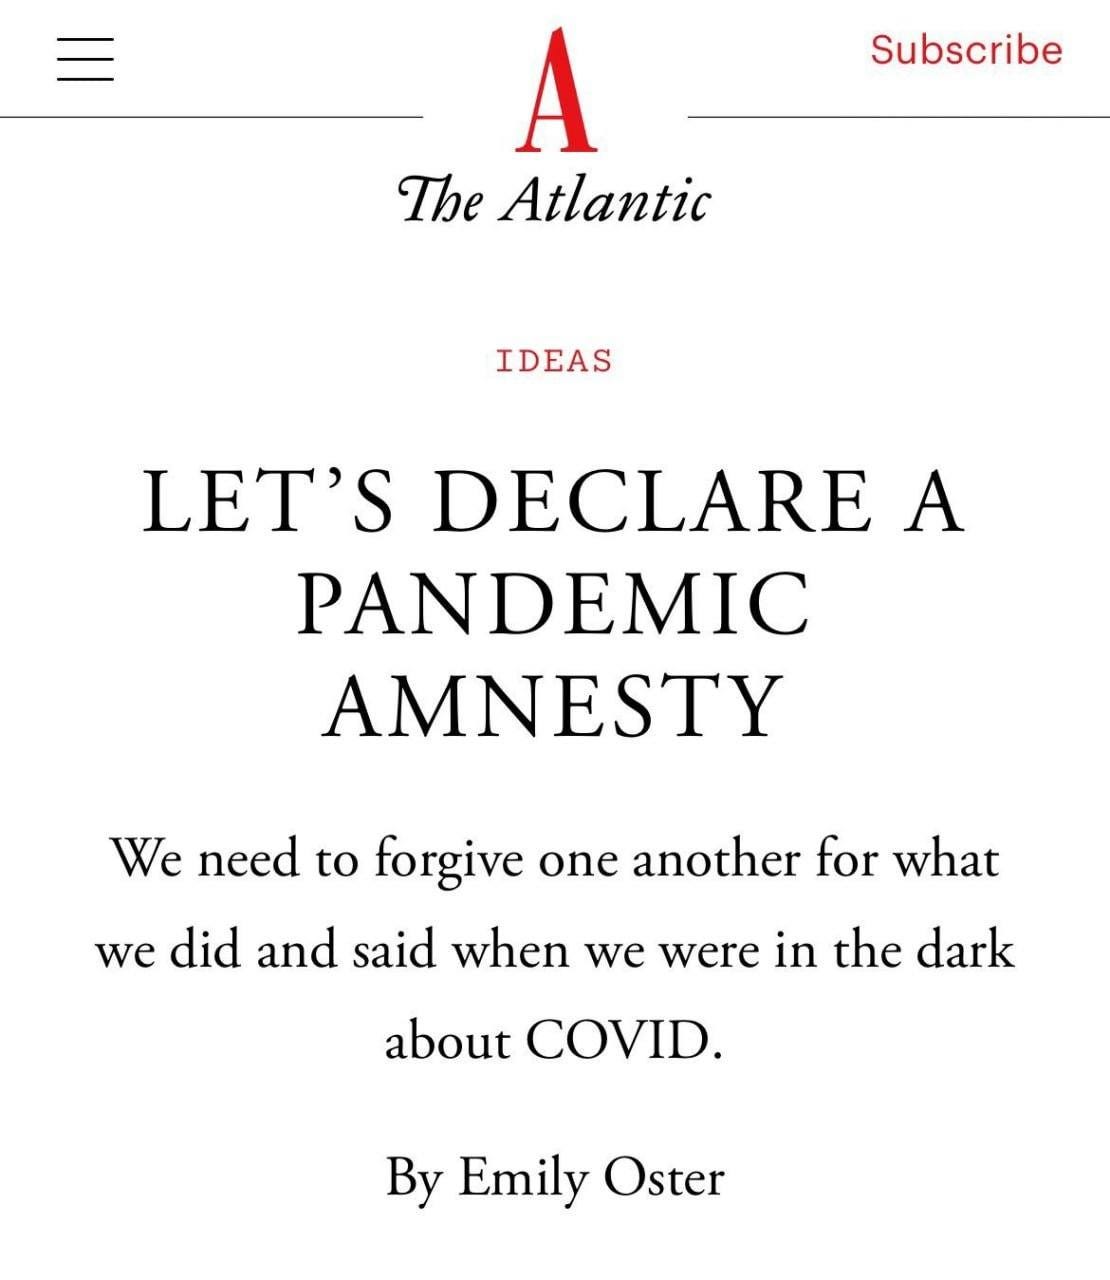 May be an image of text that says "Subscribe A The Atlantic IDEAS LET'S DECLARE A PANDEMIC AMNESTY We need to forgive one another for what we did and said when we were in the dark about COVID. By Emily Oster"